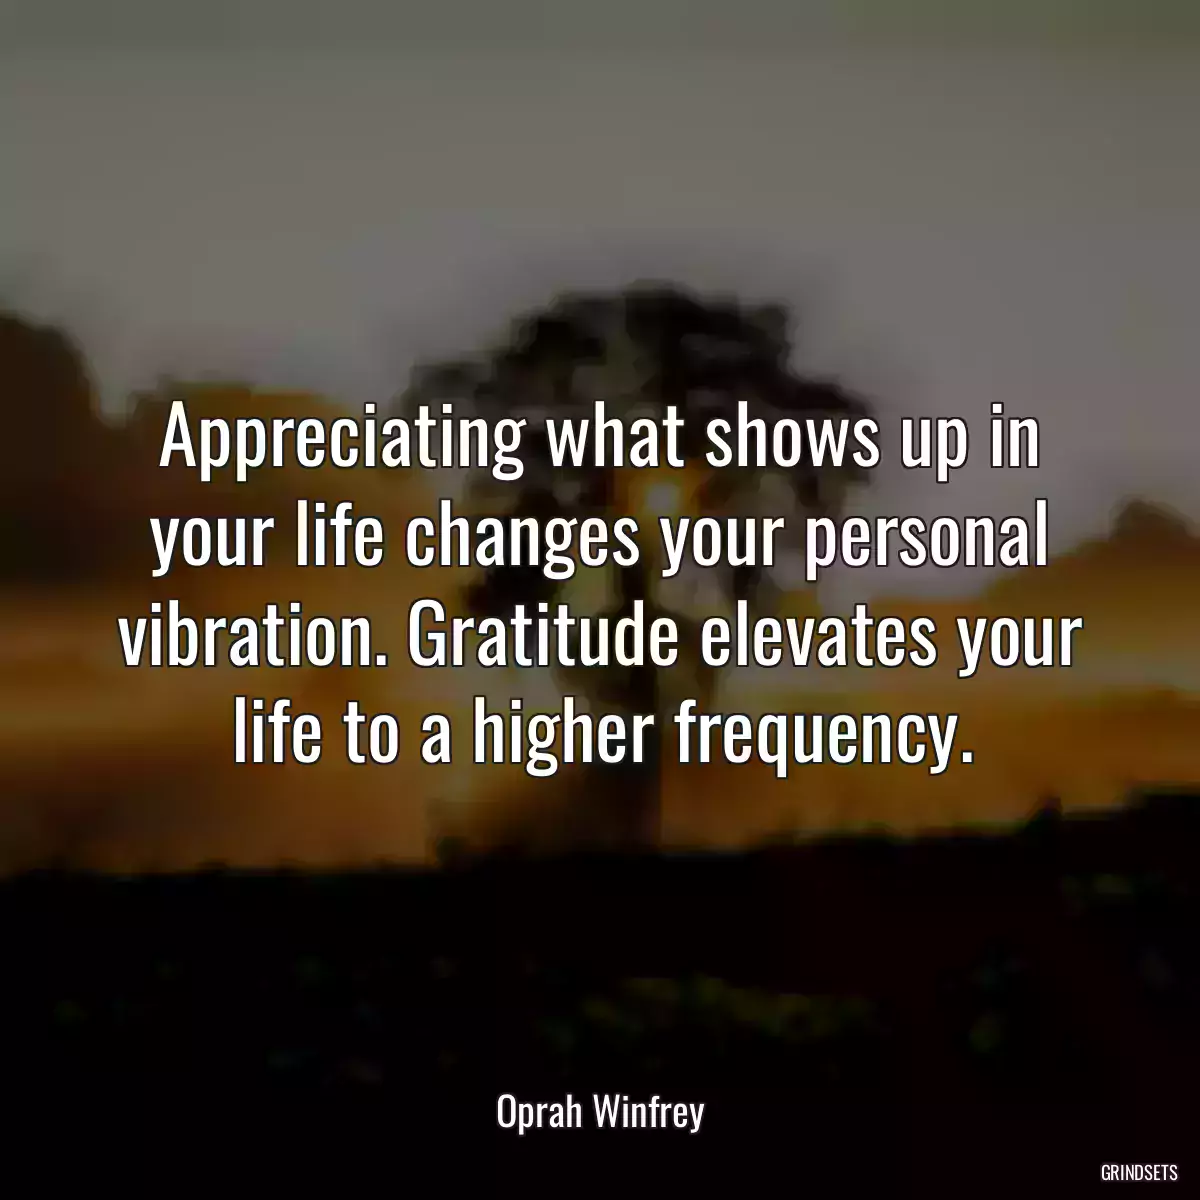 Appreciating what shows up in your life changes your personal vibration. Gratitude elevates your life to a higher frequency.